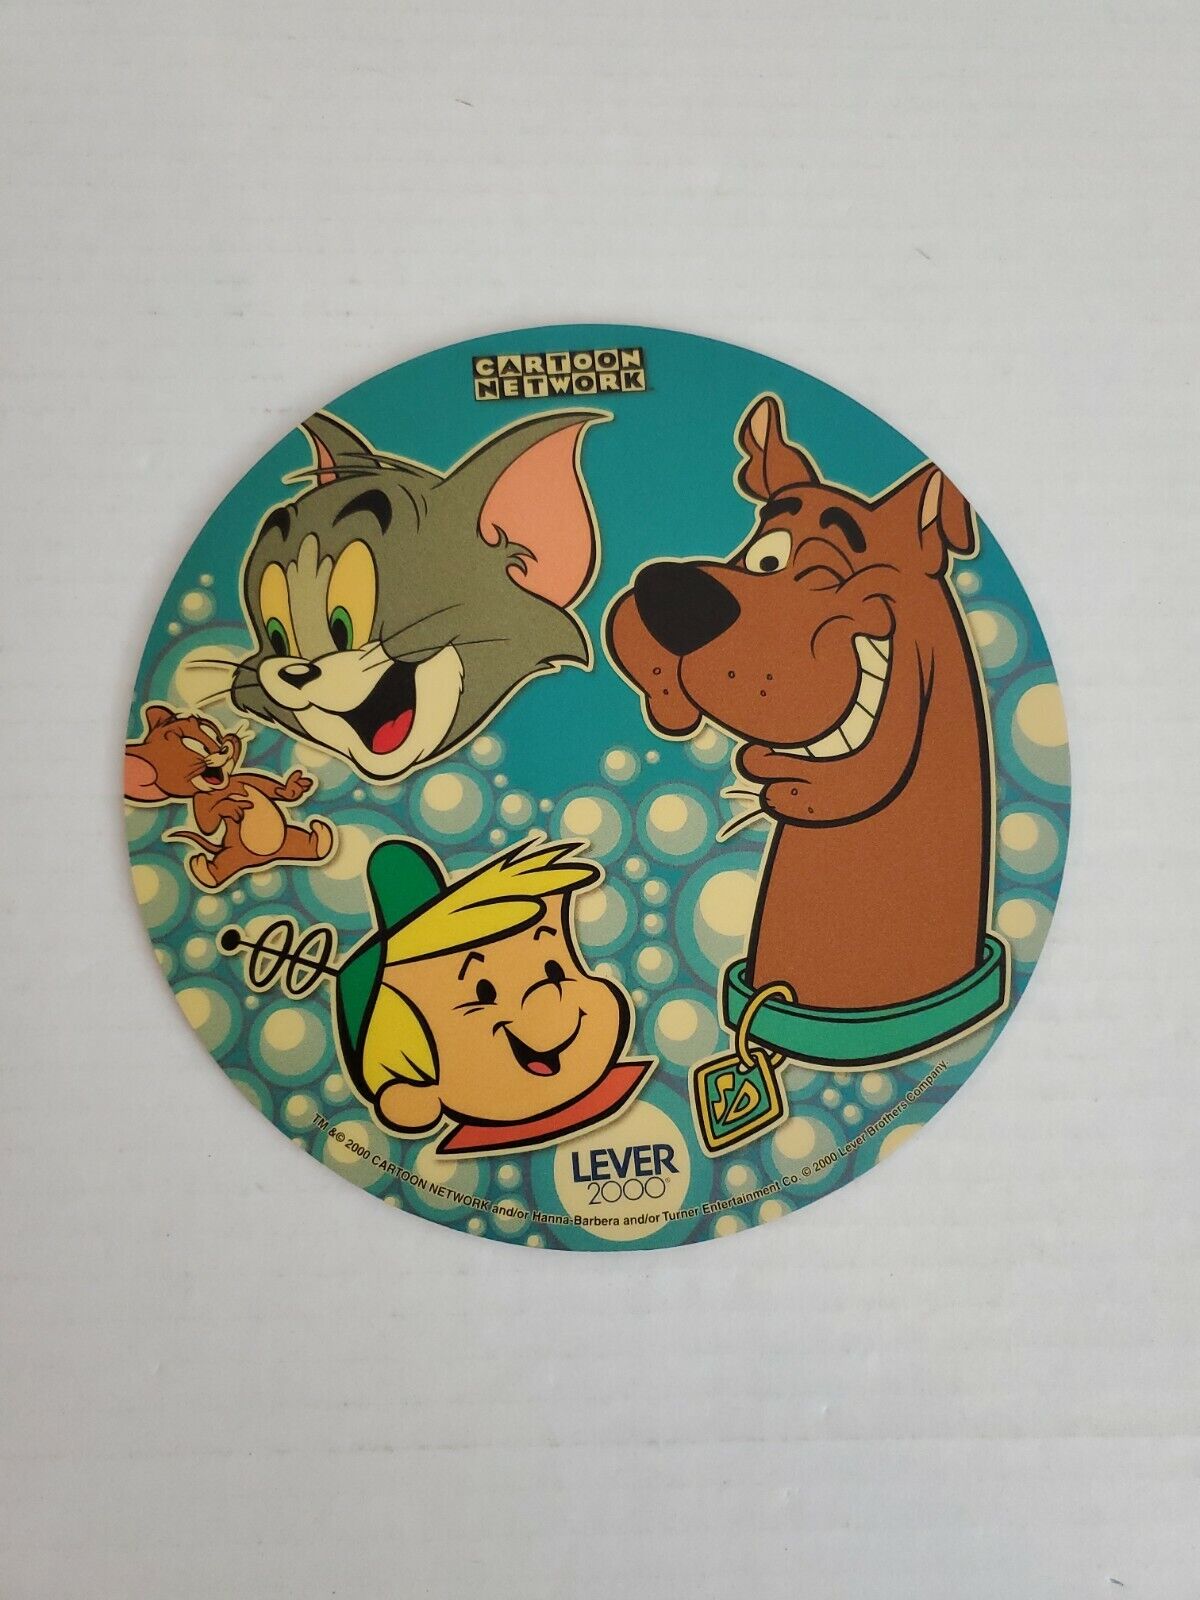 Vintage Mouse Pad Cartoon Network Scooby Doo Jetsons Tom & Jerry NEW NOS Retro